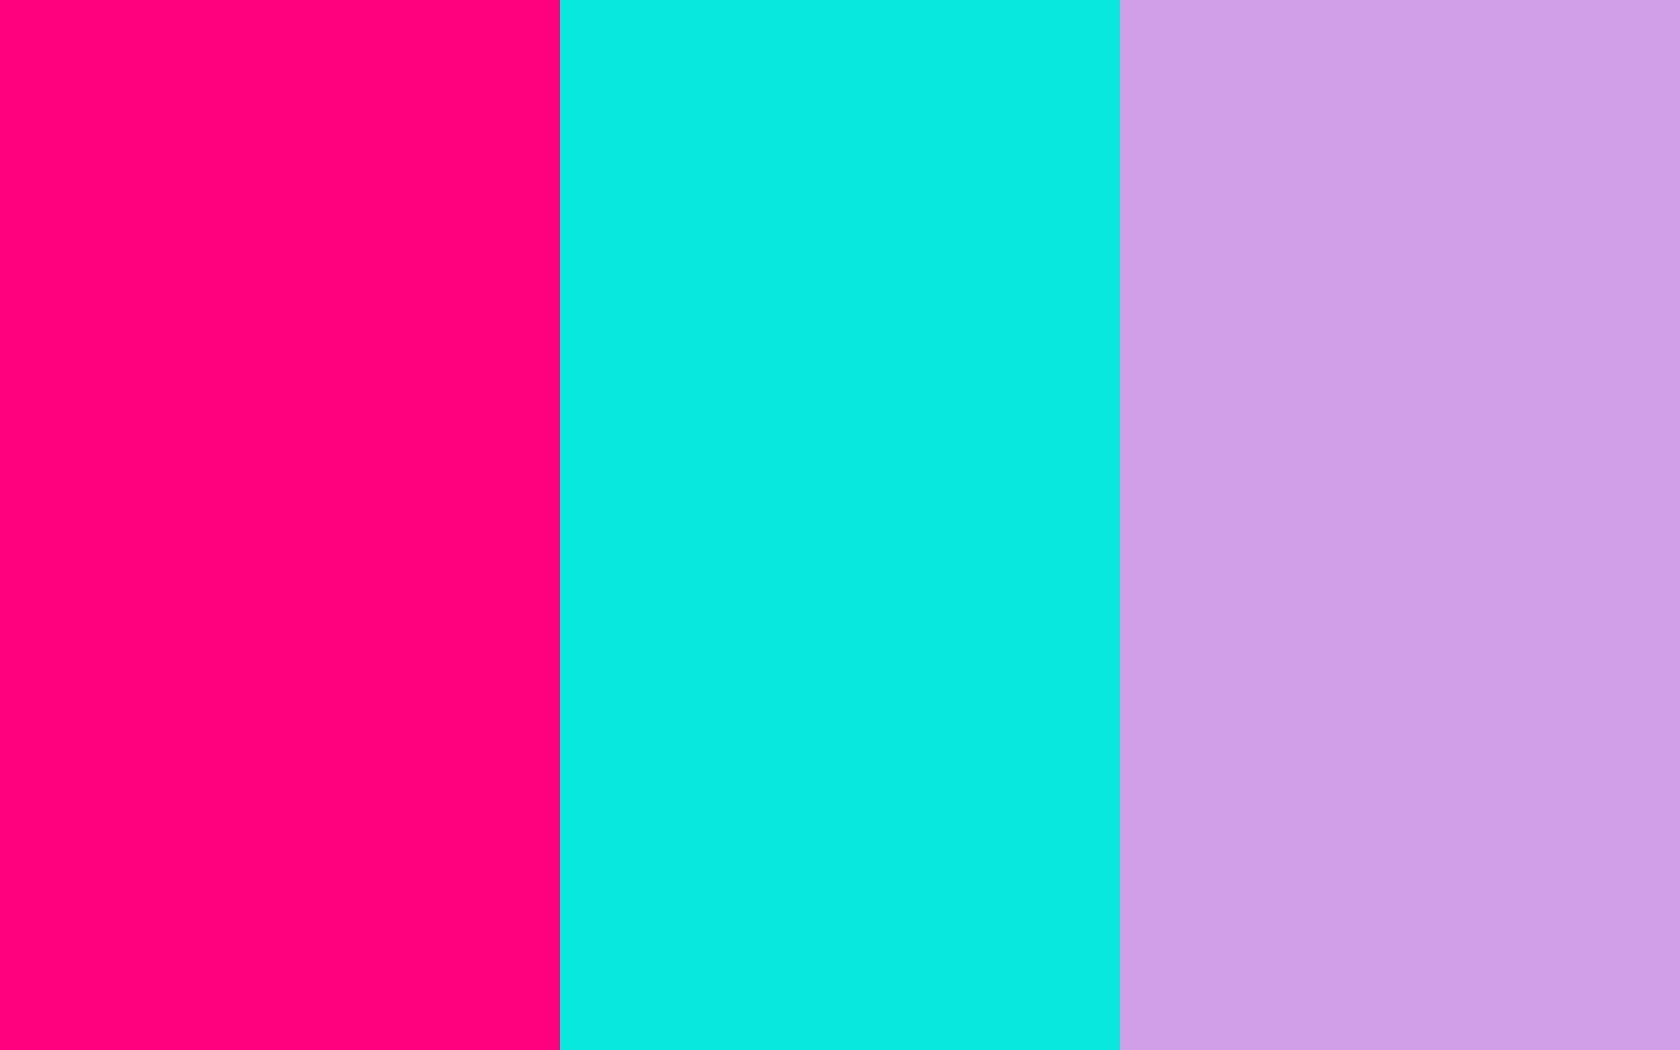 1680x1050 bright pink bright turquoise bright ube three color background